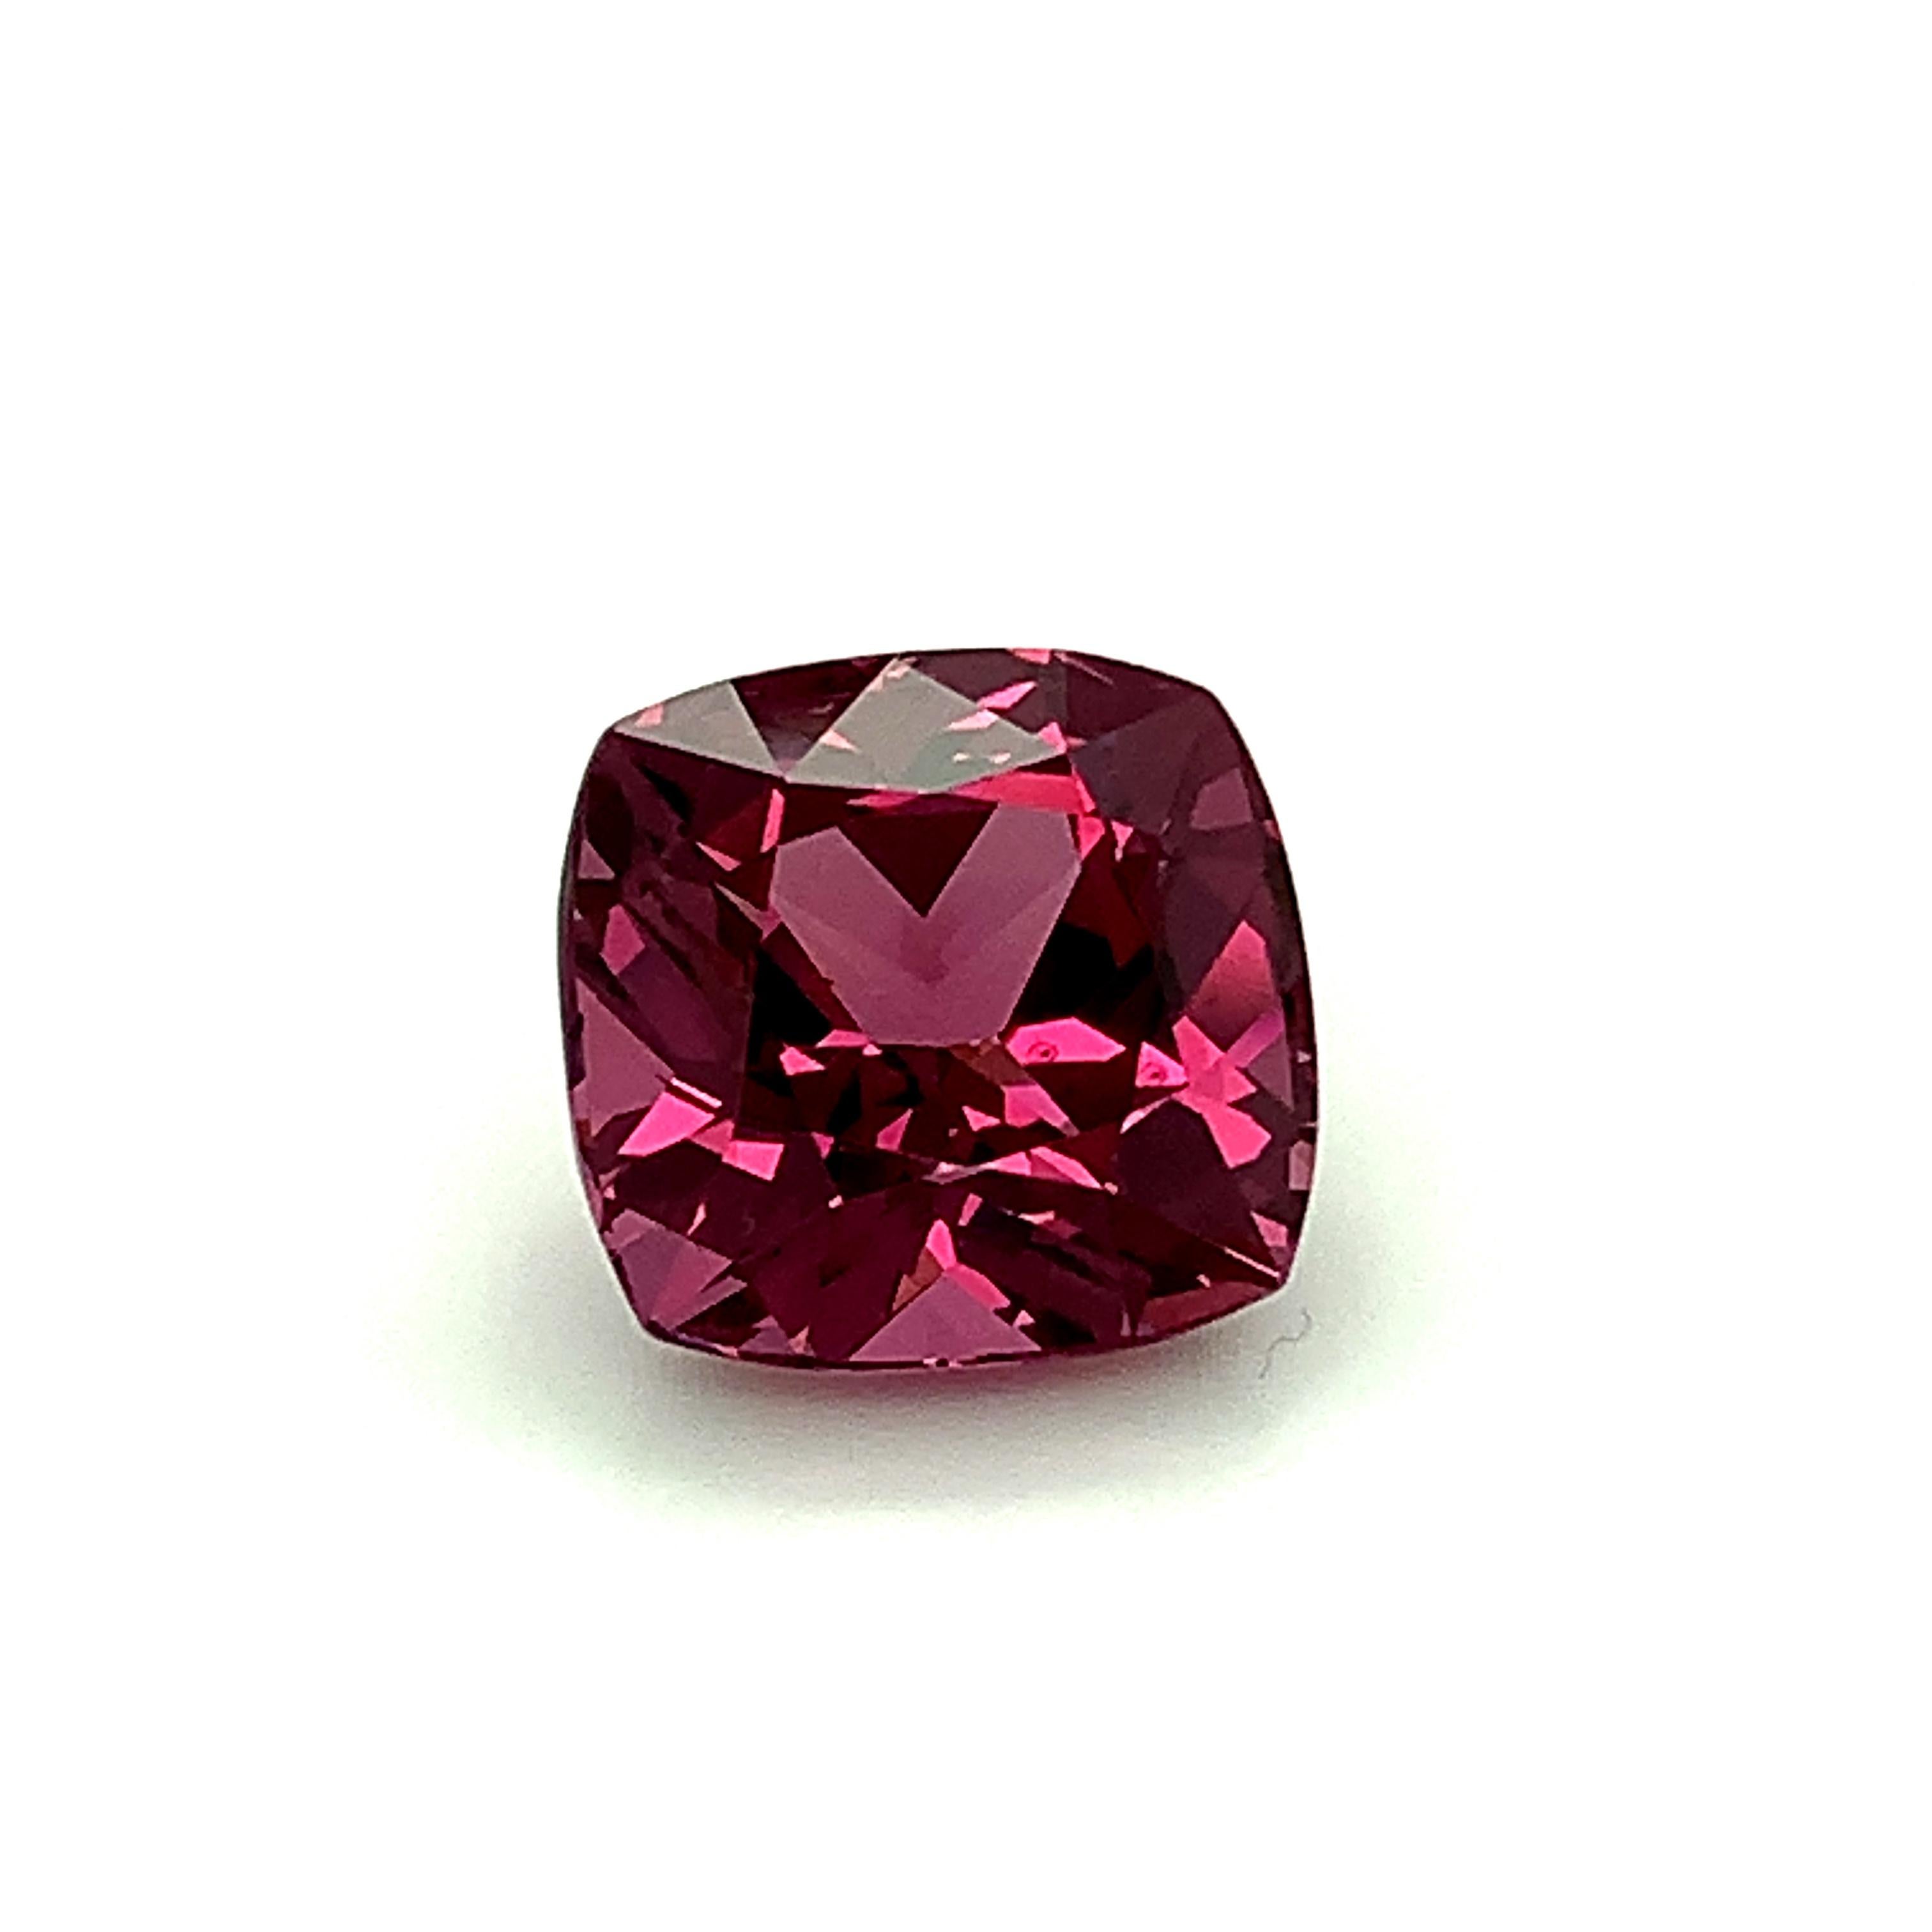 Artisan Unheated 9.26 Carat Purple Pink Spinel Cushion, Loose Gemstone, GIA Certified .A For Sale